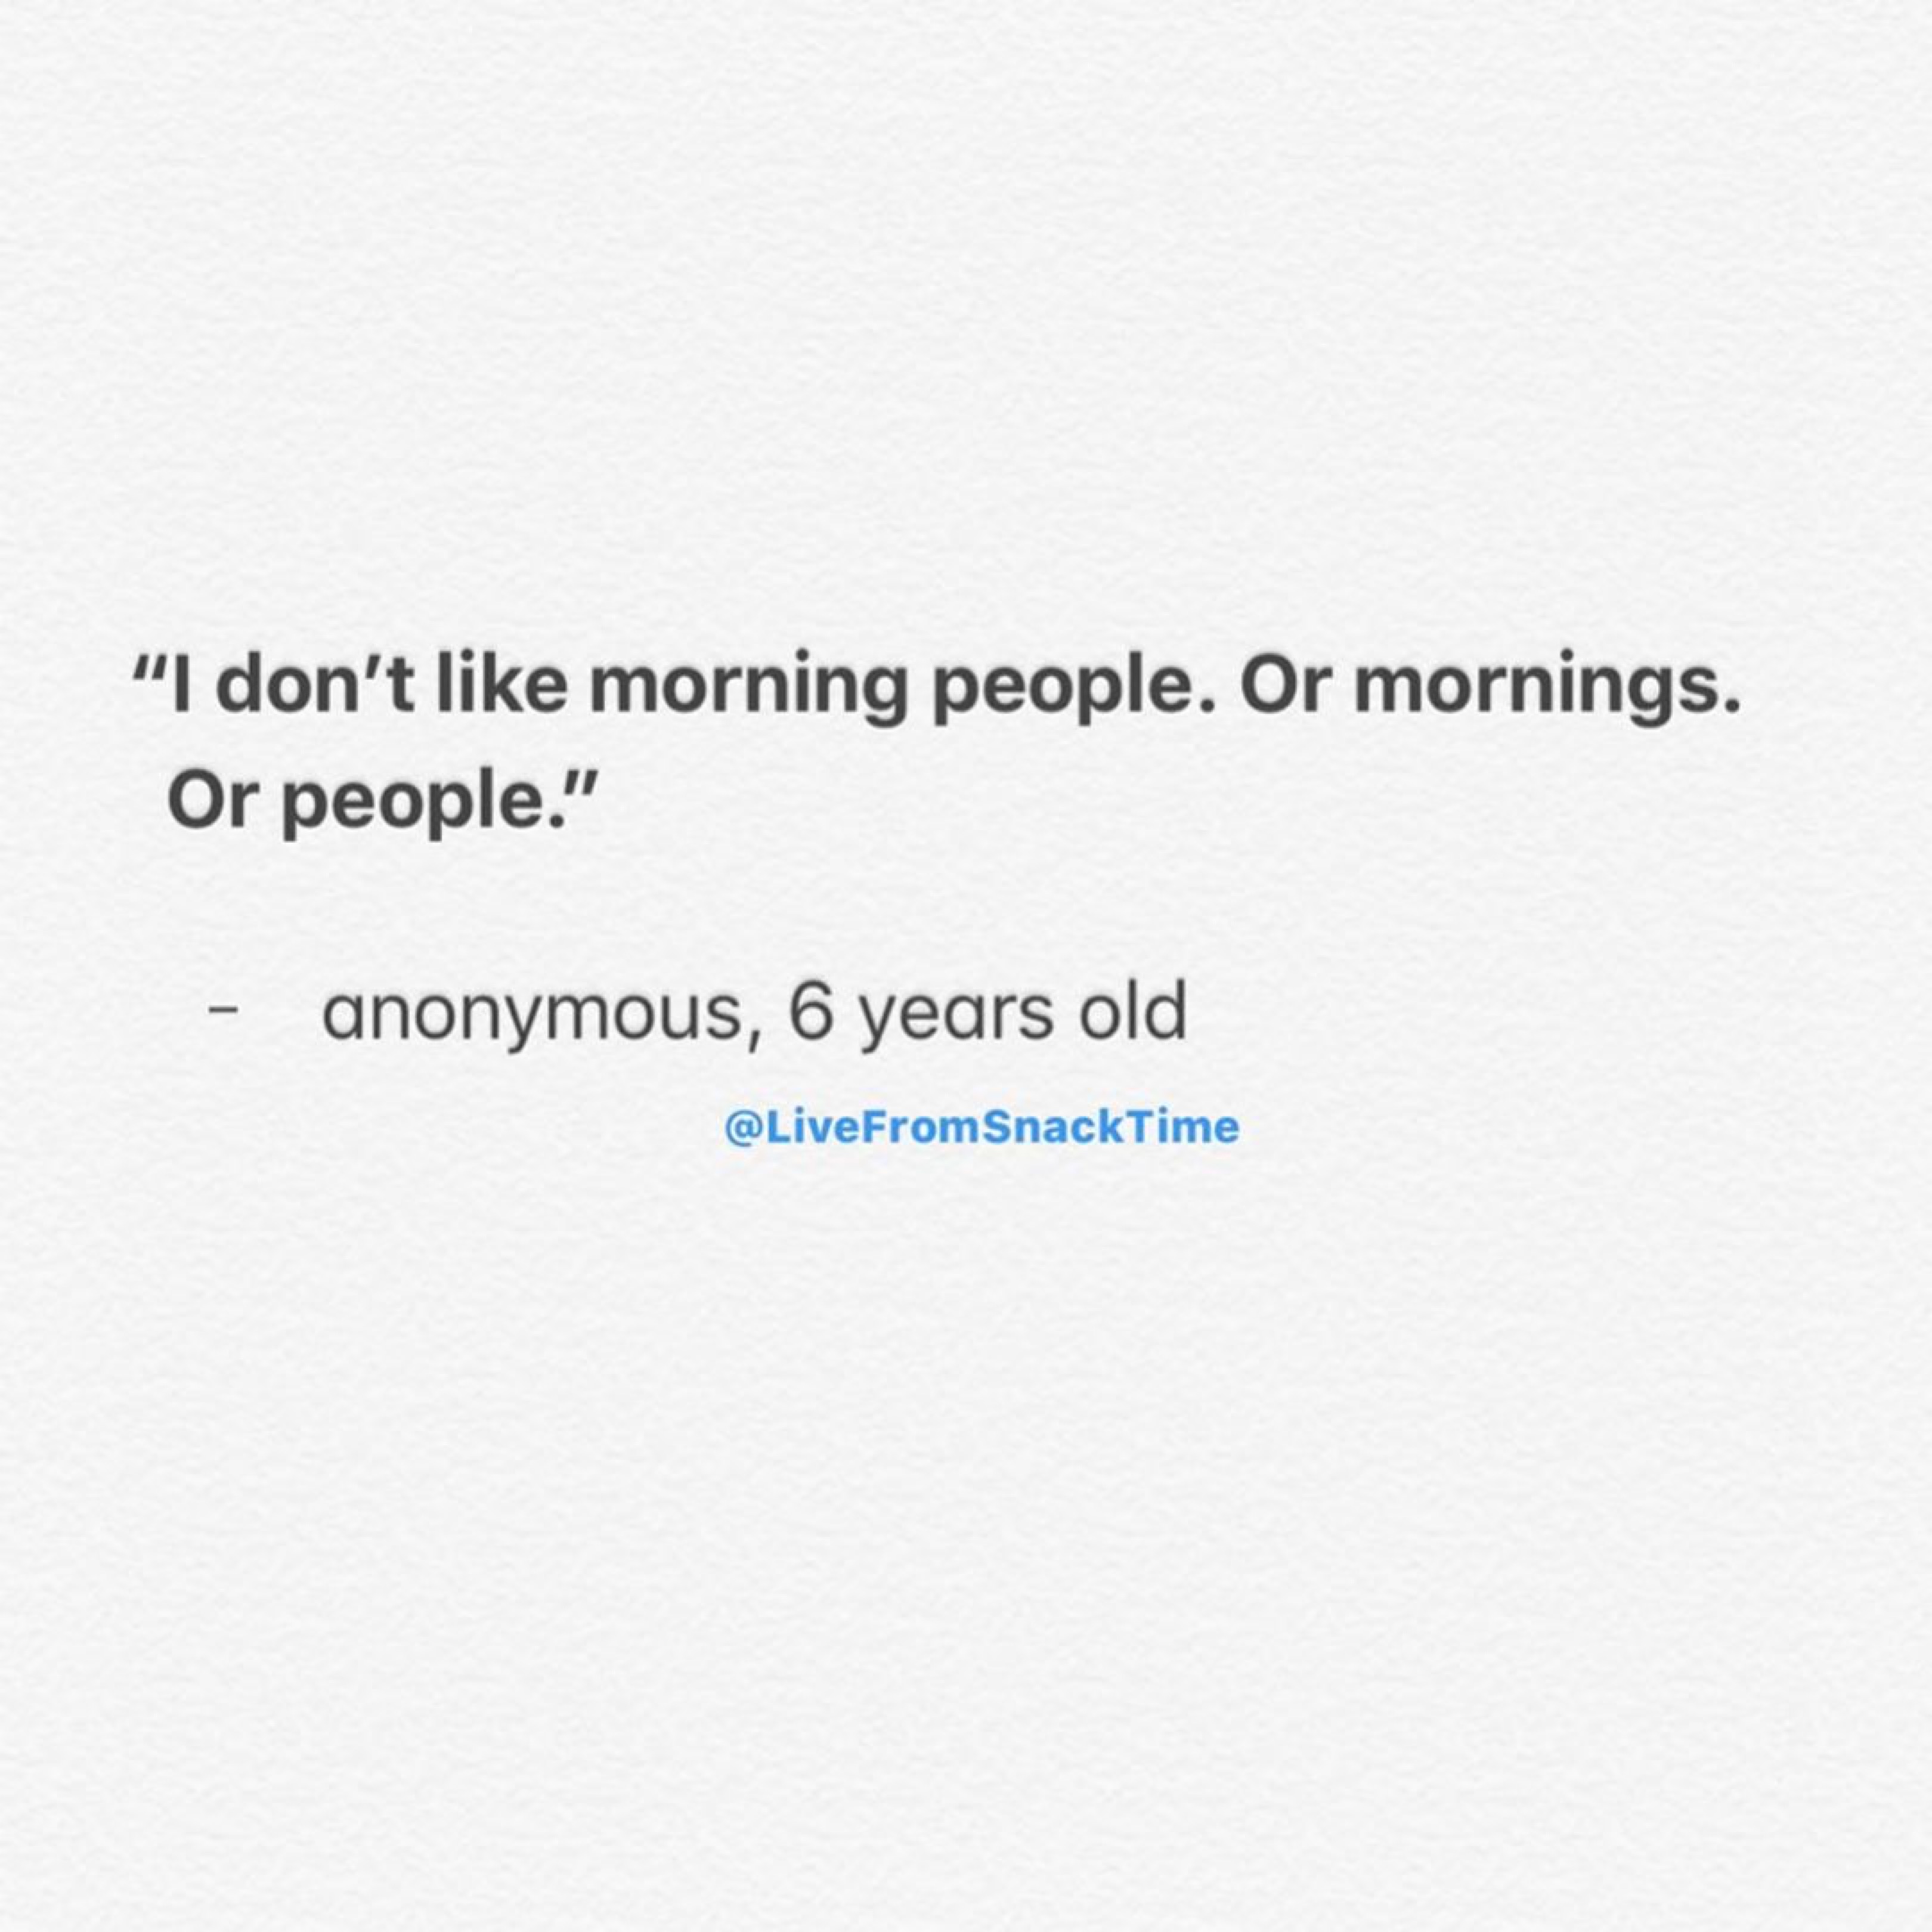 I don't like morning people. Or mornings. Or people. - anonymous, age 6. via: @livefromsnacktime